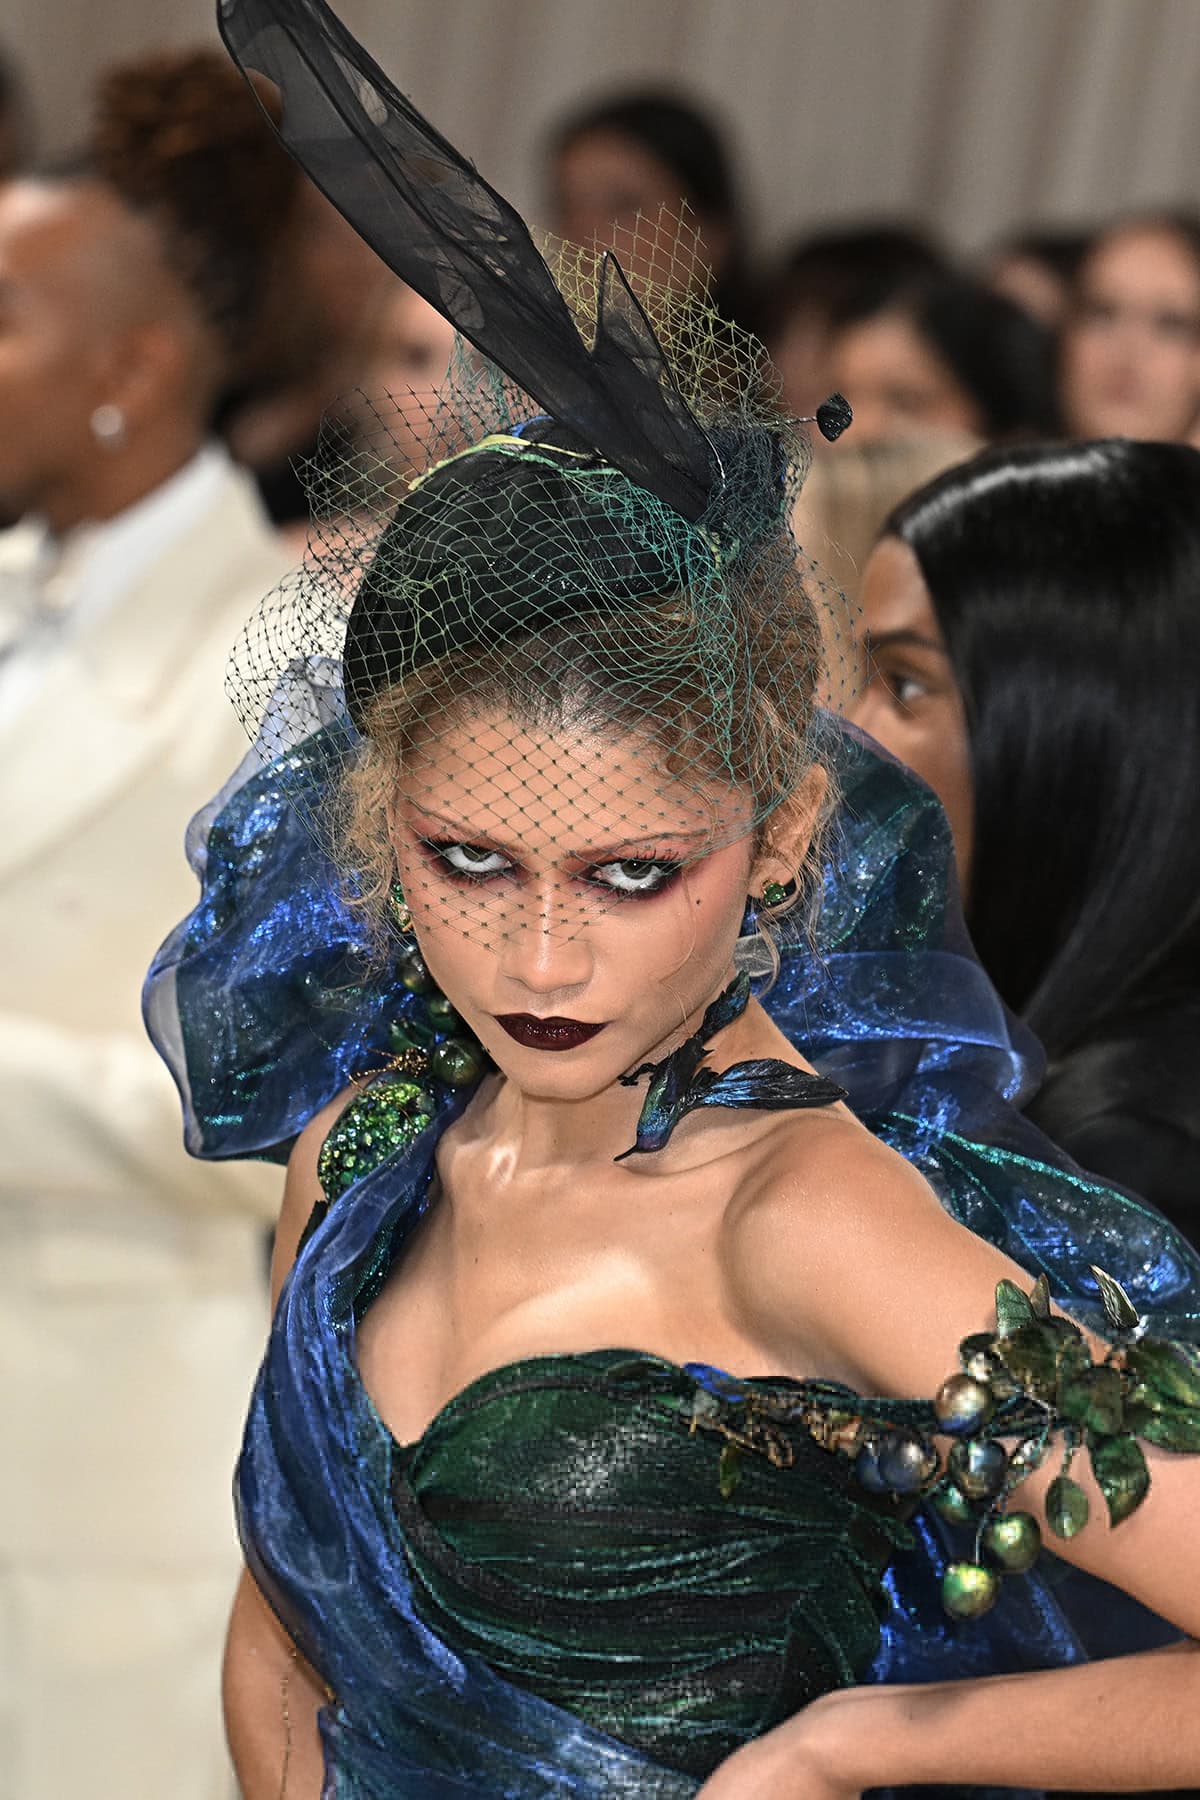 Zendaya is seen sporting a Stephen Jones "reverse swatching" beret hat made of silver metal wire with a black hand-painted plume-like voile sitting atop a hand-painted net veil